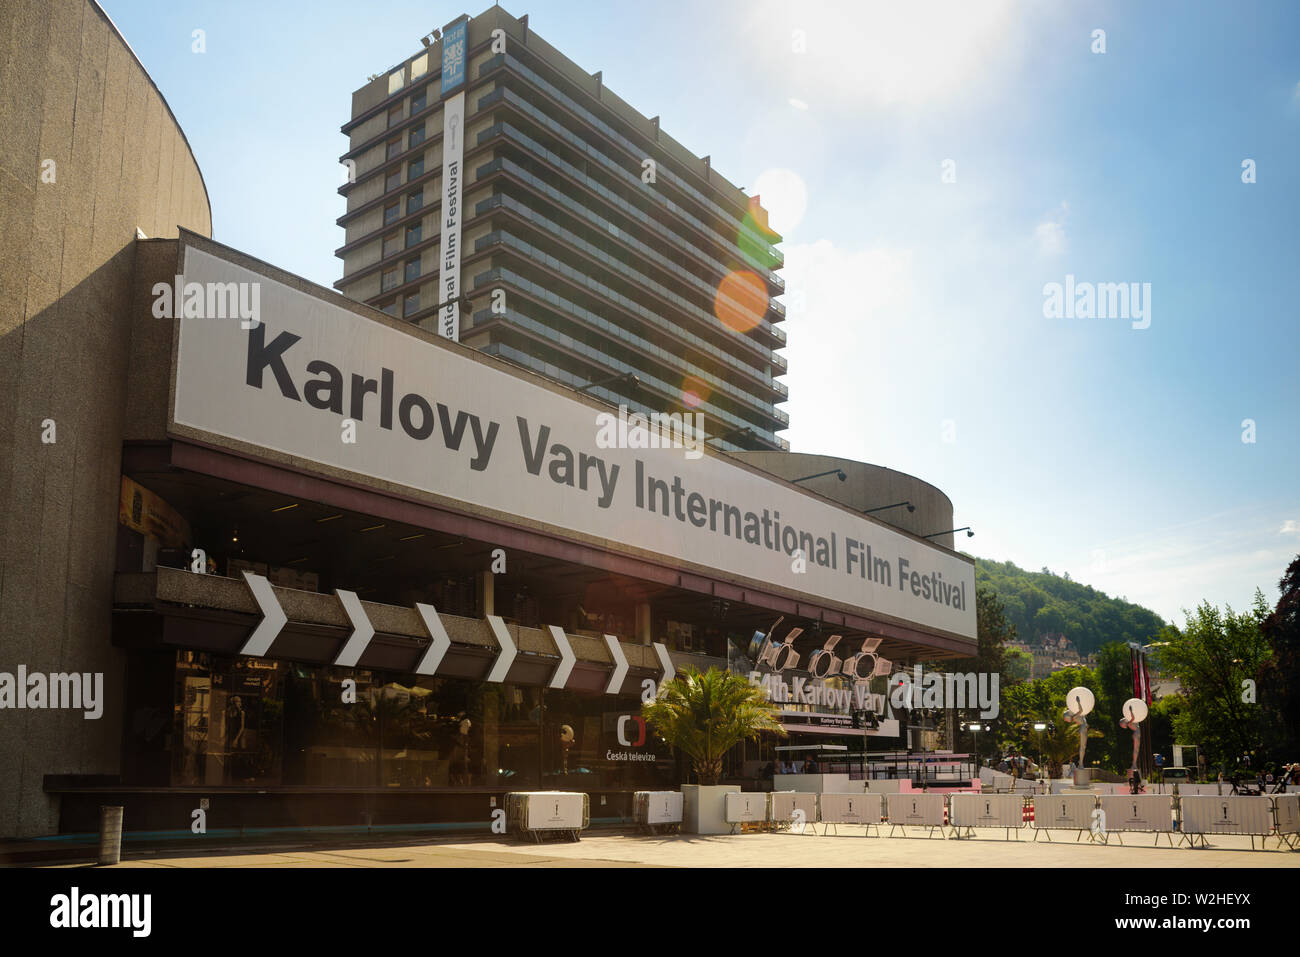 KARLOVY VARY, CZECH REPUBLIC - JULY 02, 2019: The red carpet entrance to the Hotel Thermal 54th Karlovy Vary International Film Festival is shown on J Stock Photo